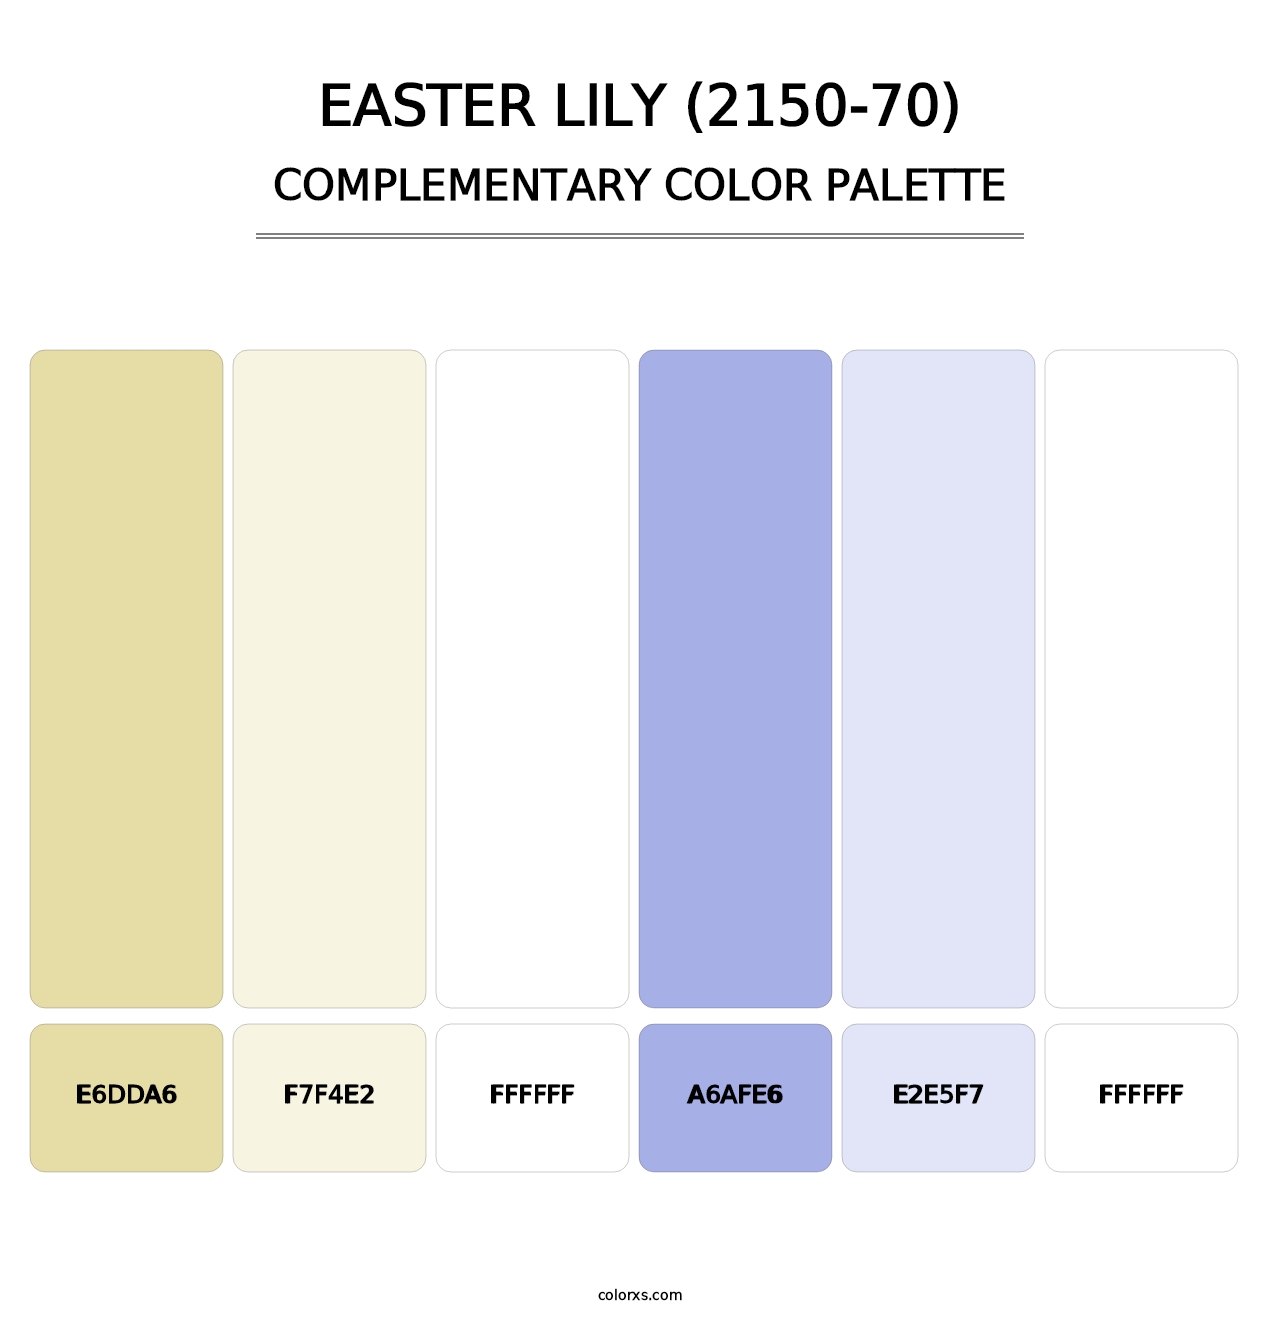 Easter Lily (2150-70) - Complementary Color Palette